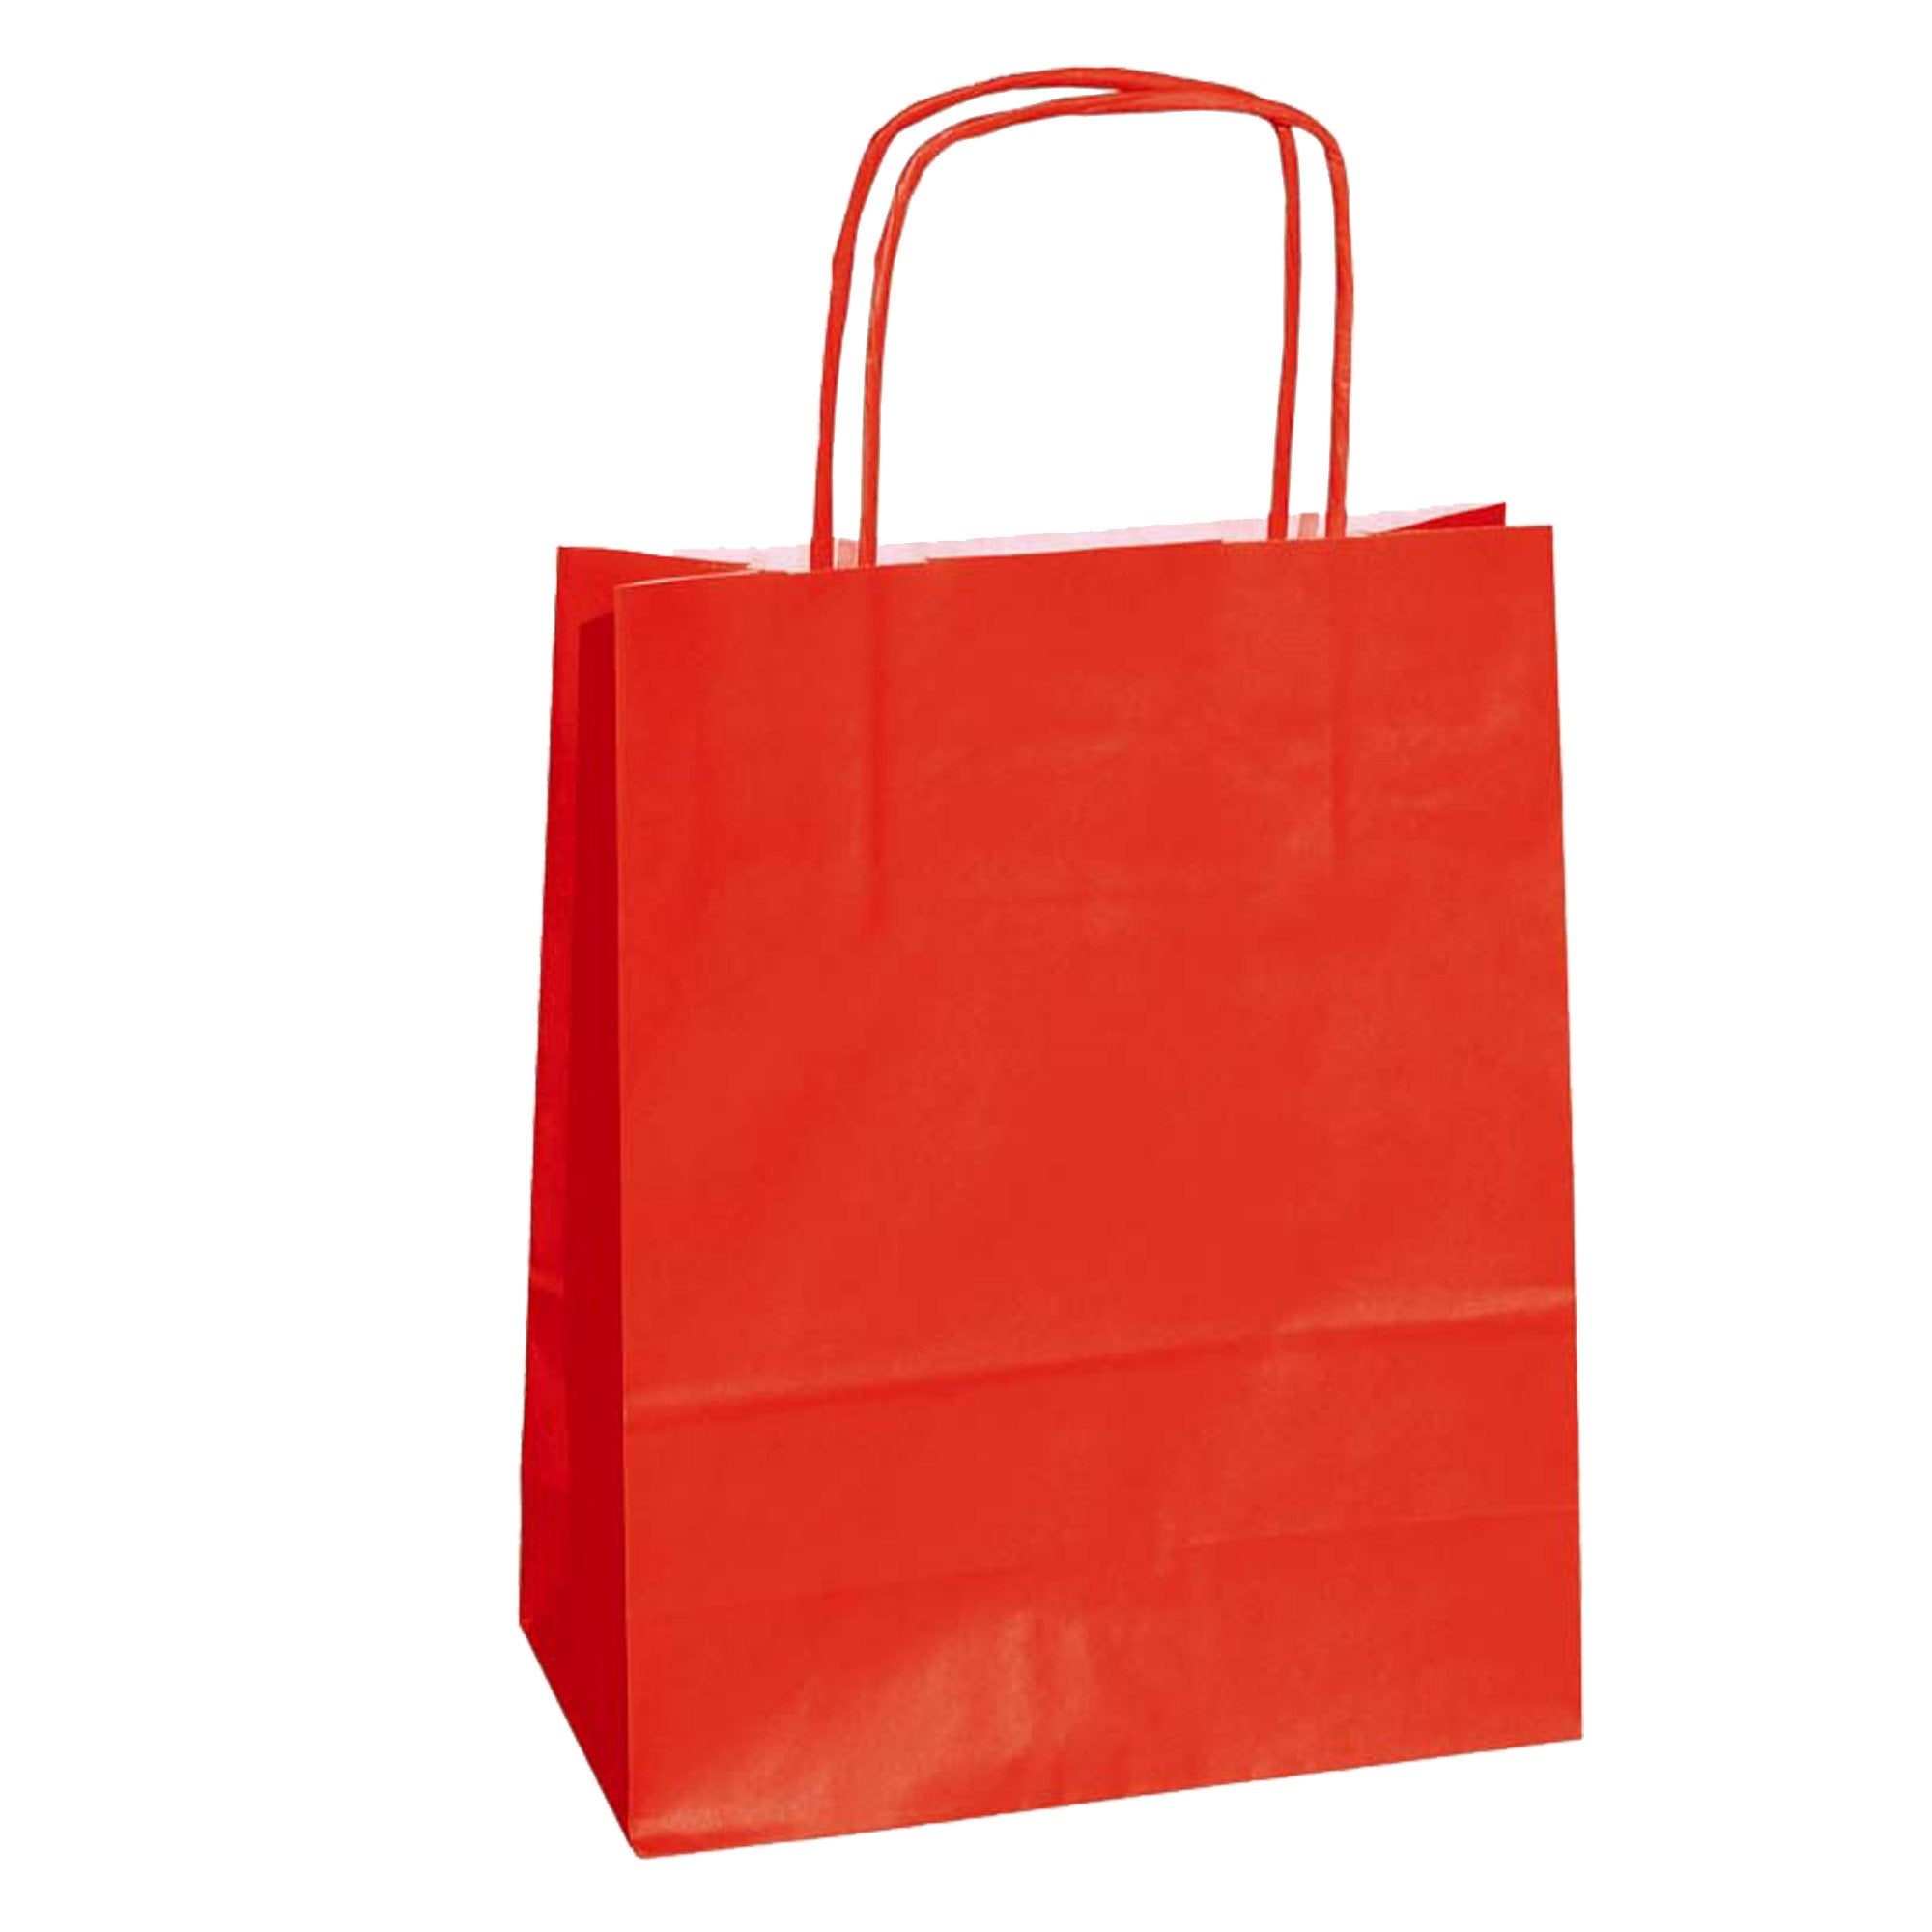 mainetti-bags-25-shoppers-carta-kraft-26x11x34-5cm-twisted-rosso